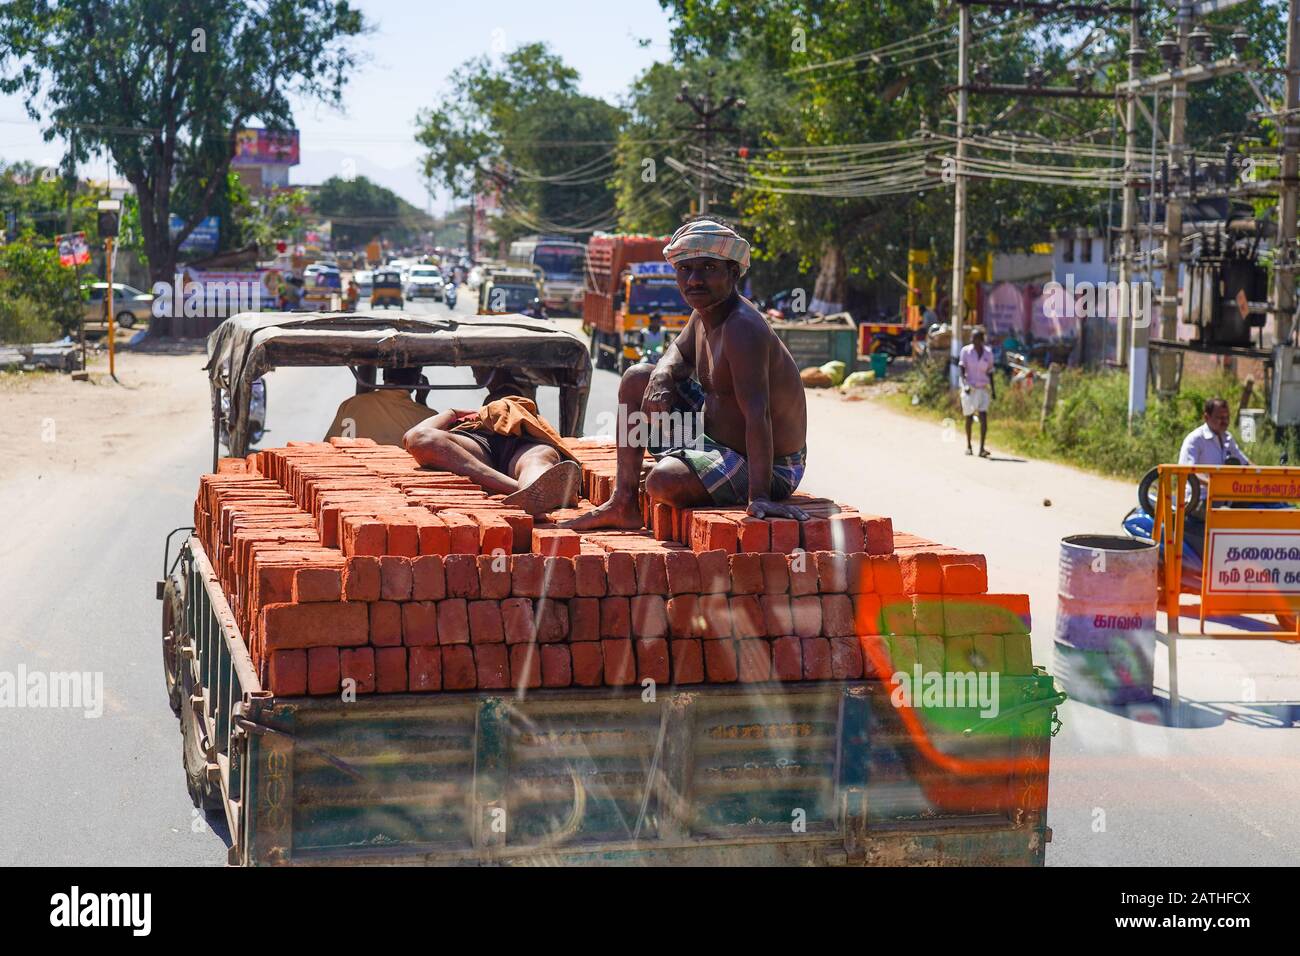 A man sits on a pile of bricks on a lorry. From a series of travel photos in Kerala, South India. Photo date: Sunday, January 12, 2020. Photo: Roger G Stock Photo